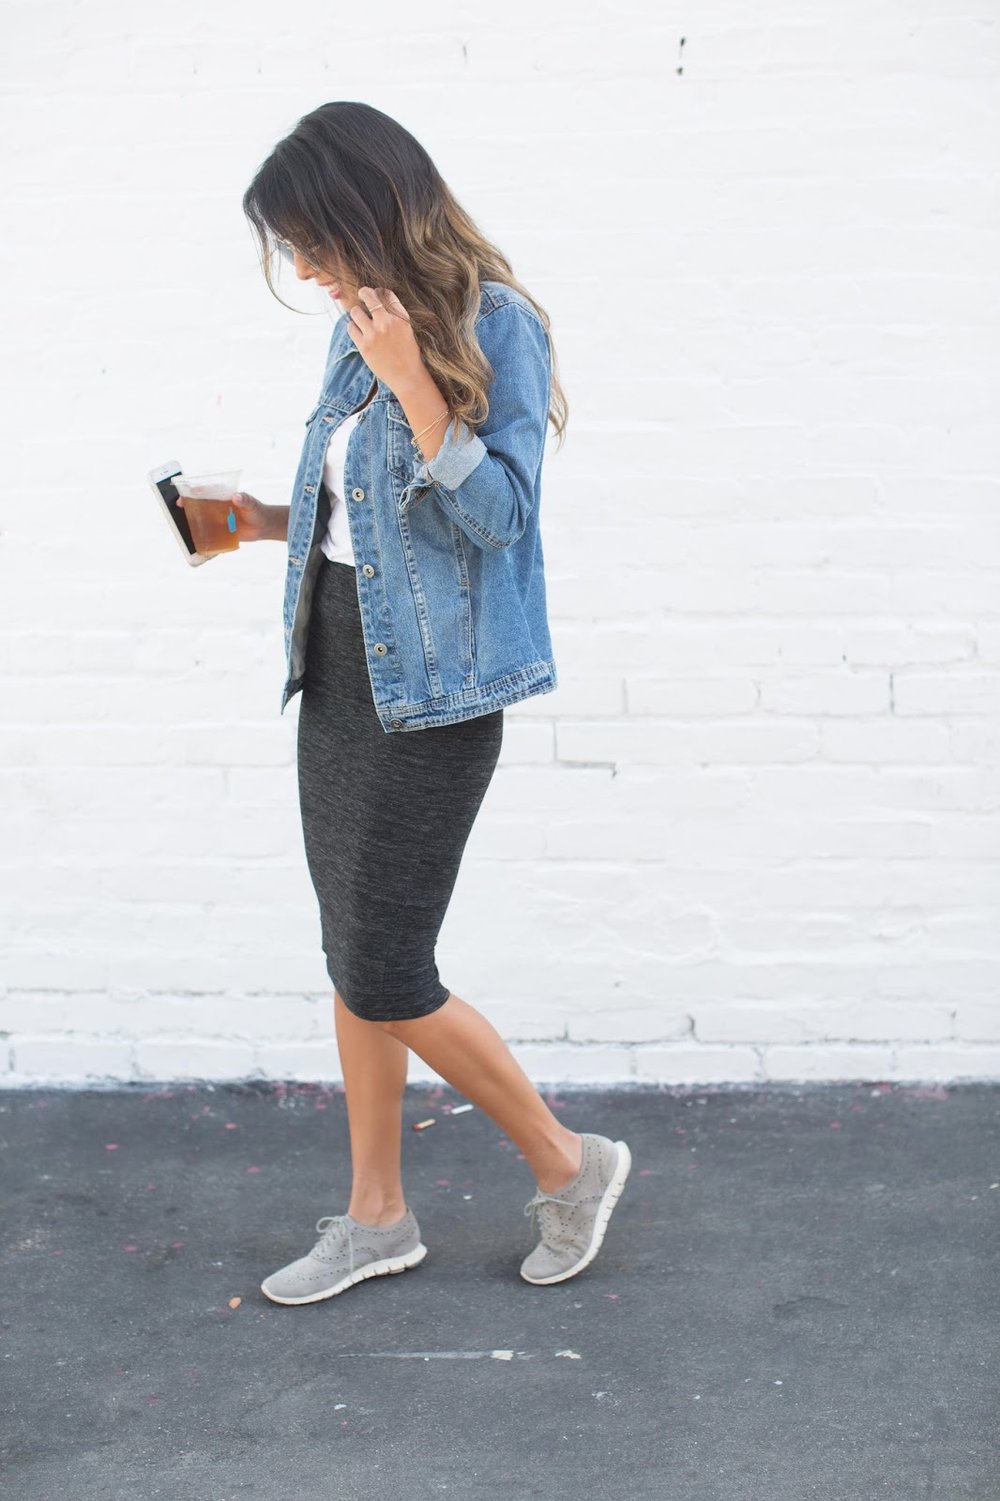 how to wear denim jacket, tennis shoes with skirts, how to wear denim jacket, casual weekend outfit, venice california